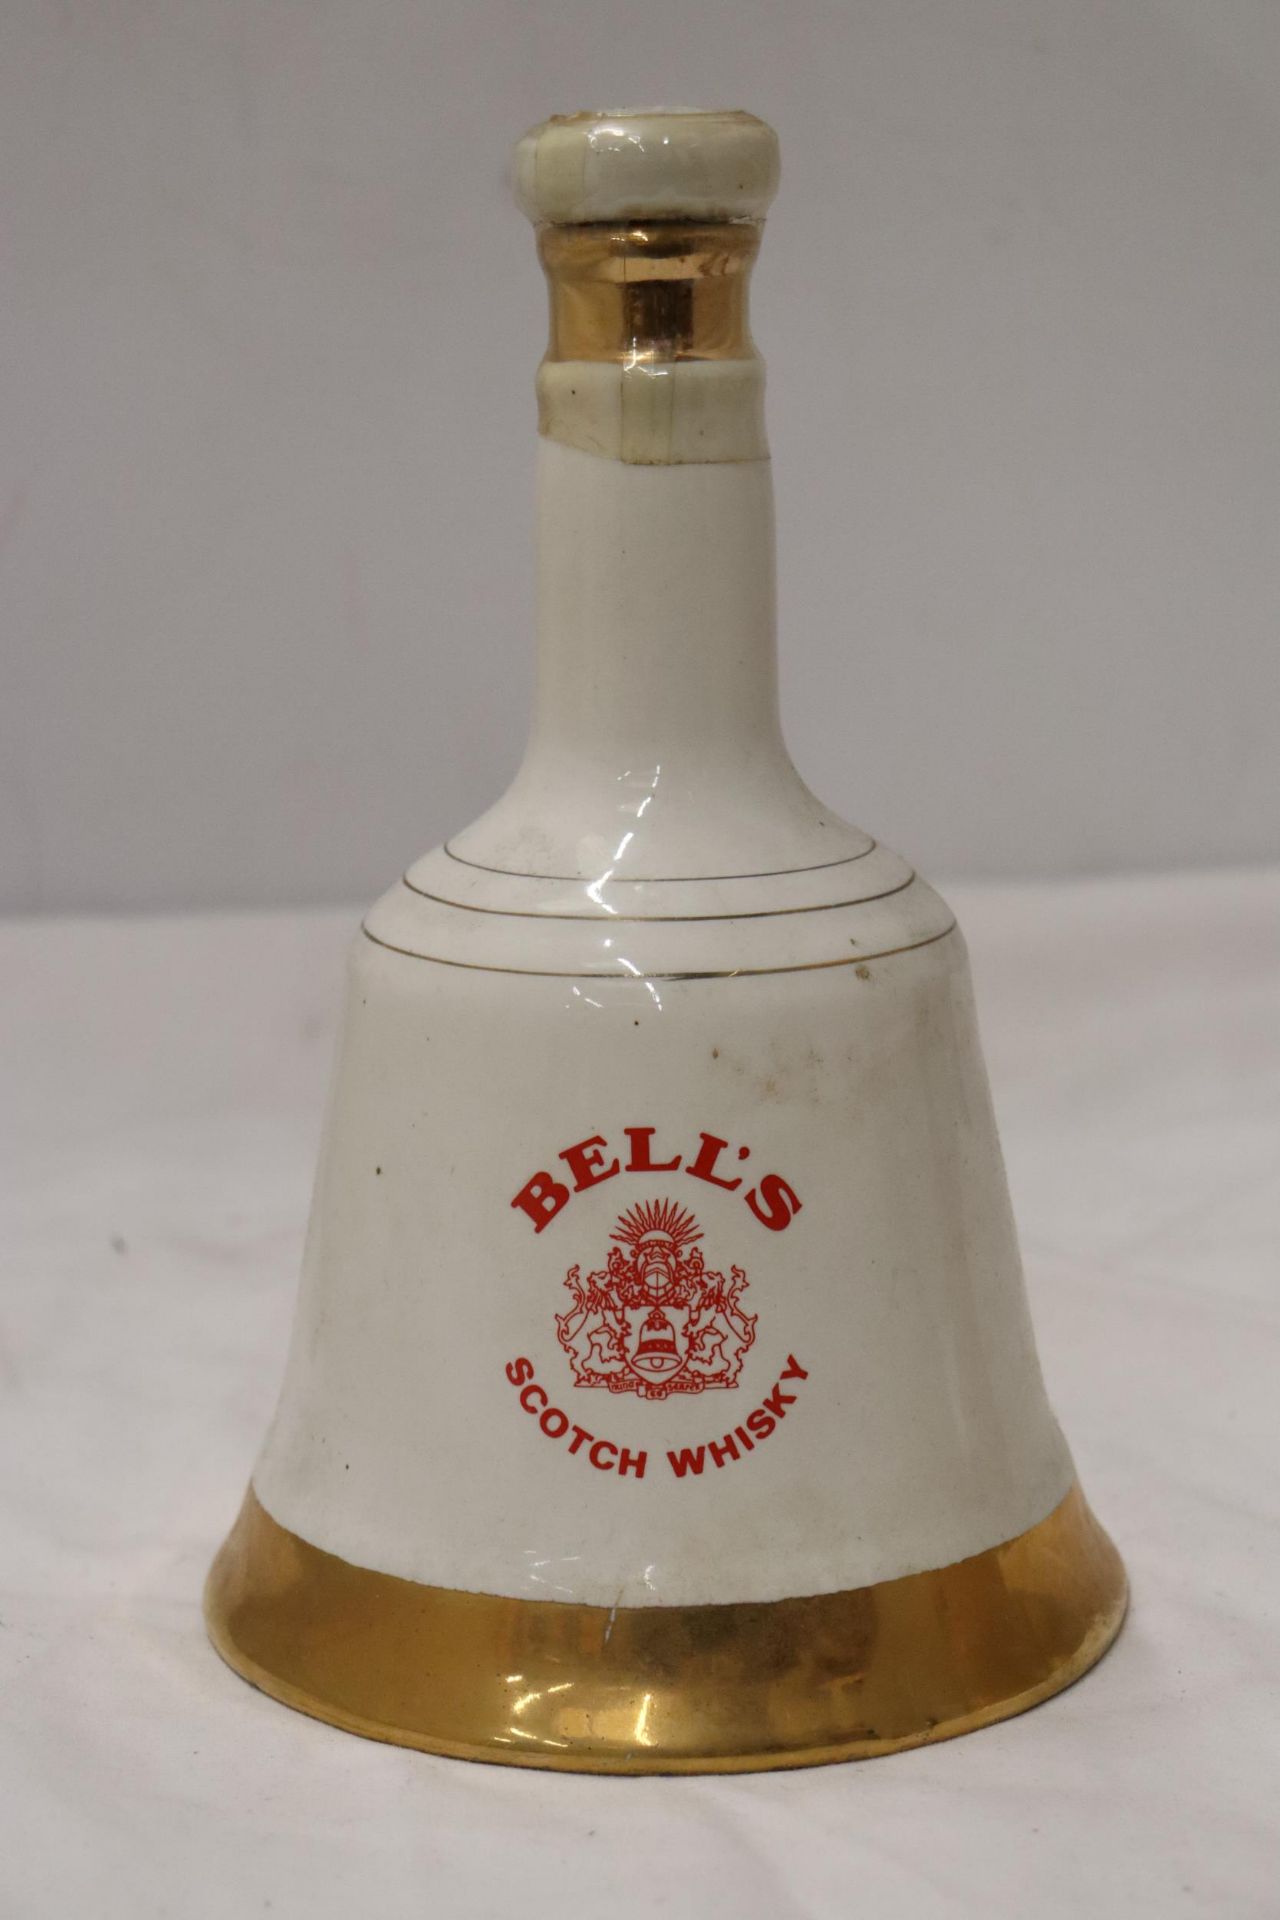 ONE LARGE AND THREE SMALL, BELL'S WHISKY CERAMIC DECANTERS - Image 5 of 8